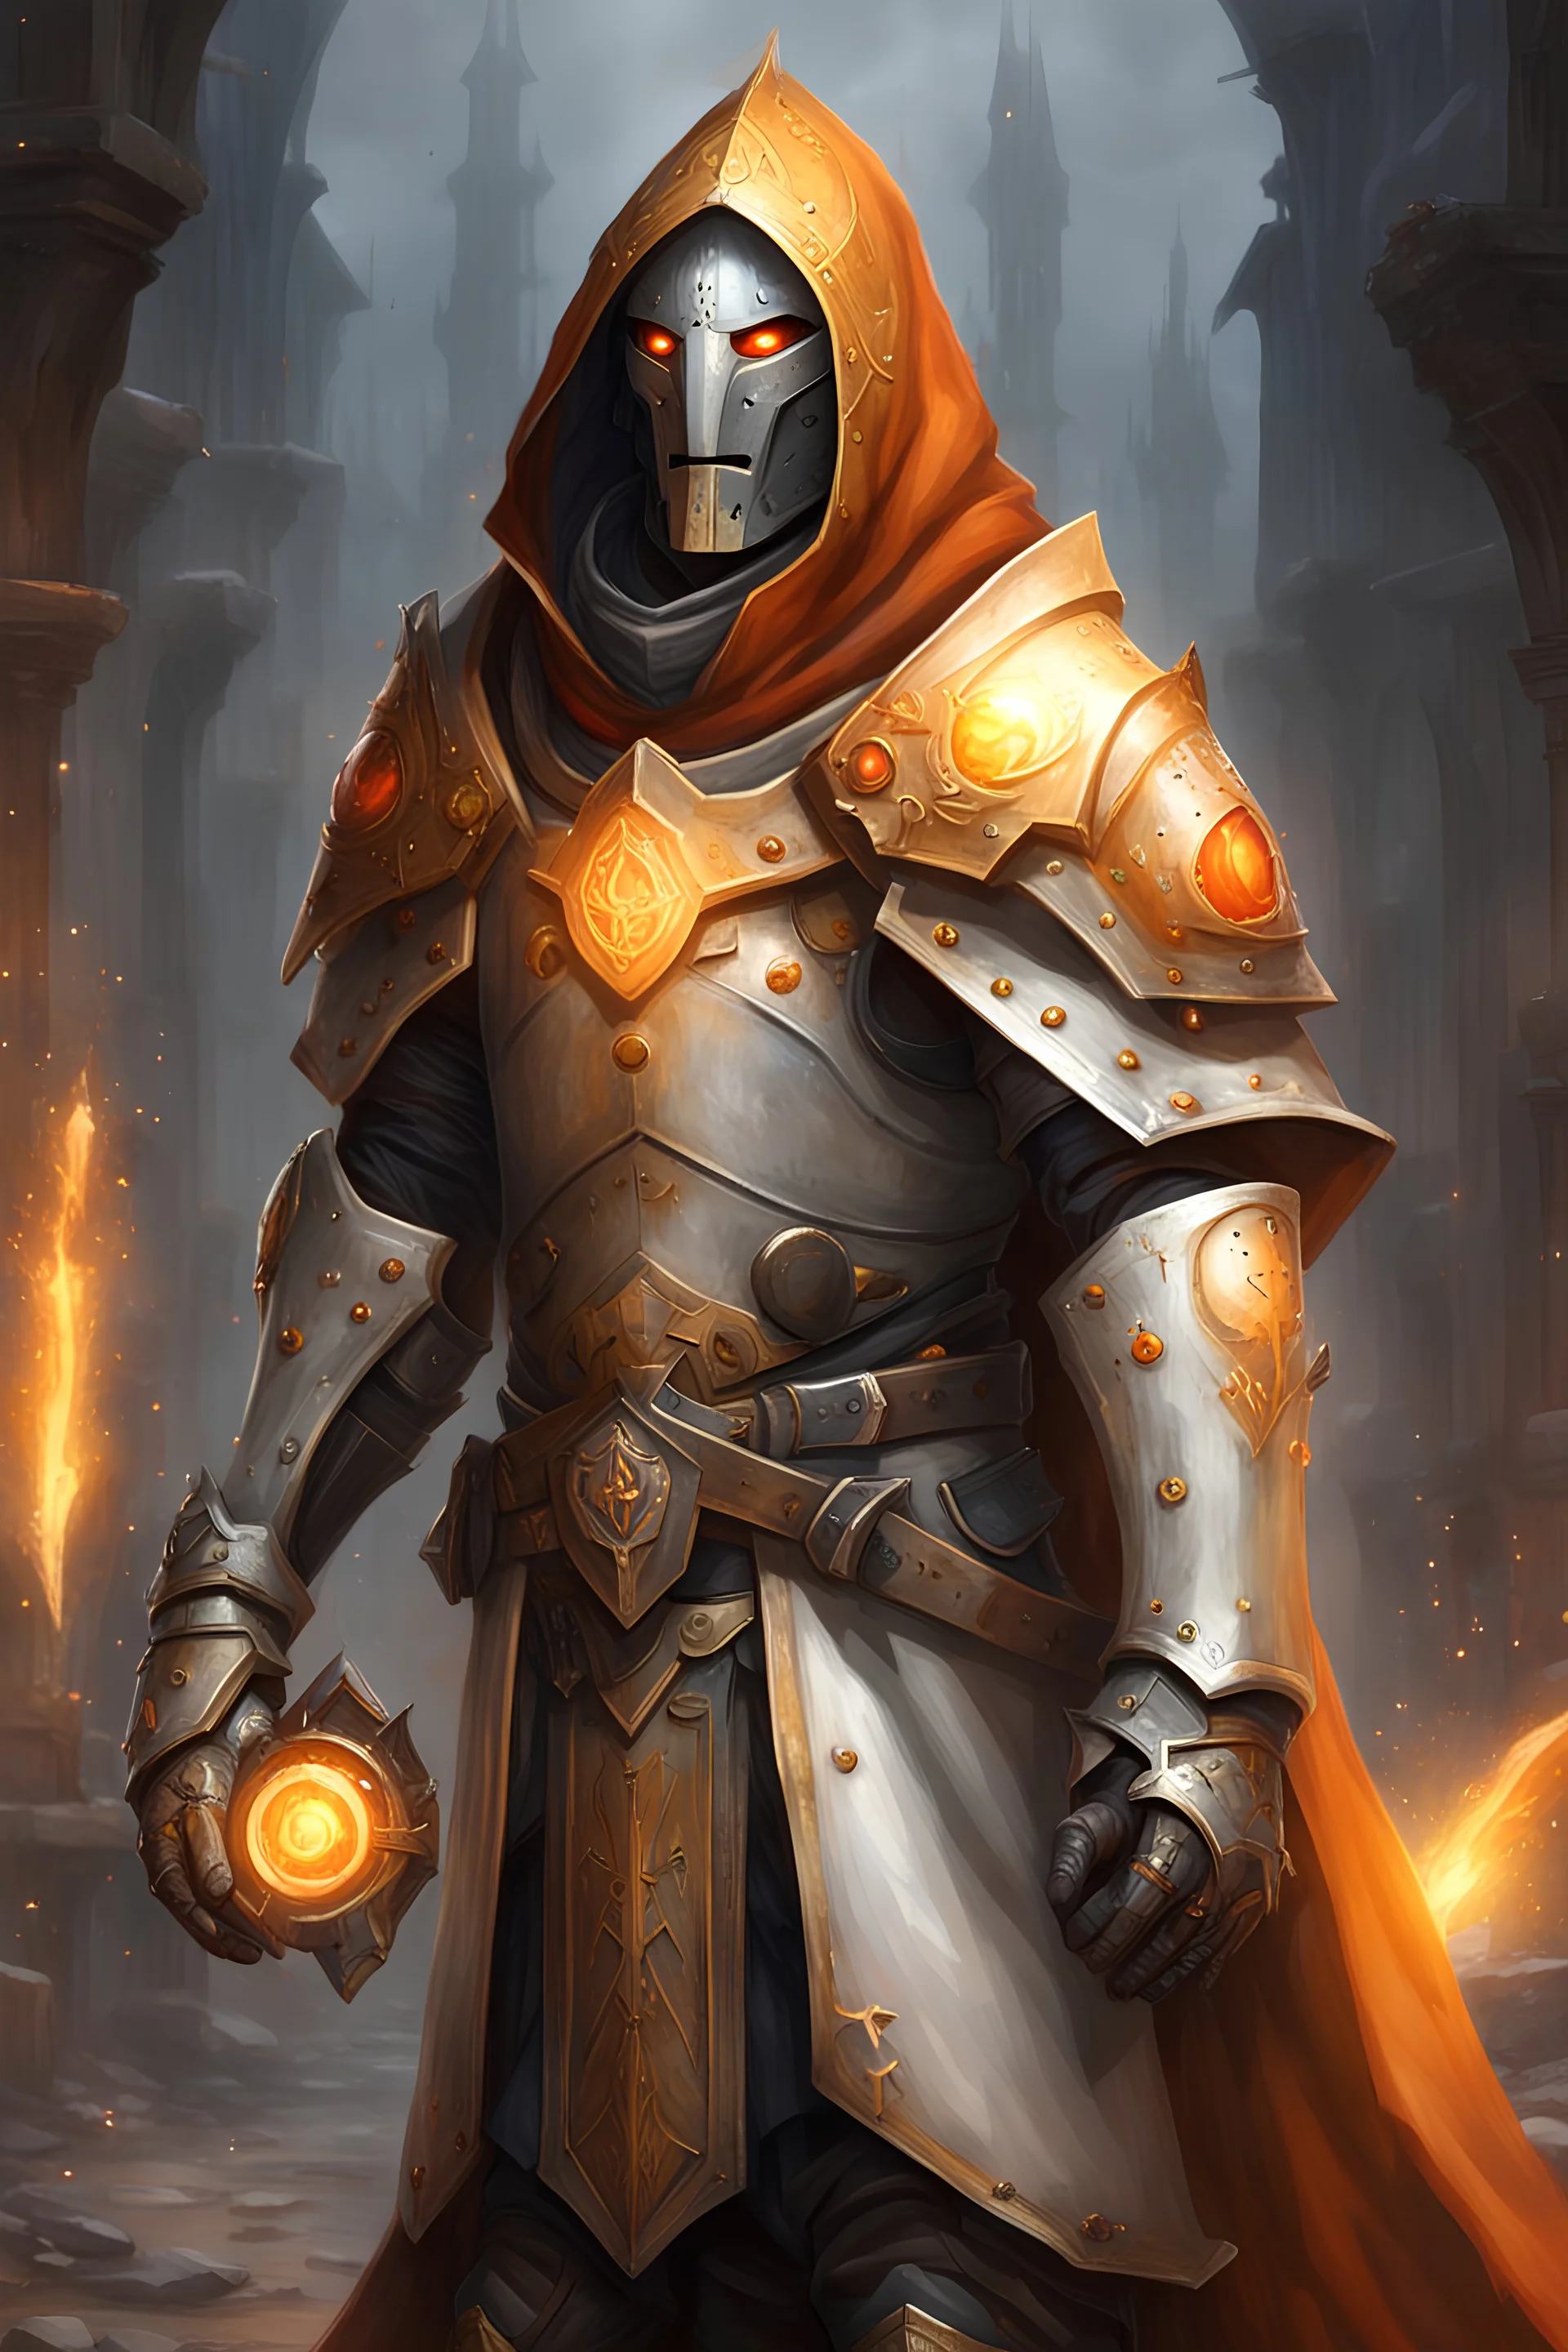 A realistic and photographic warforged cleric of Moradin that looks like a human, with a hood and cloak that are golden white, without pauldrons, with some orange color, without a hammer, without a sword, with a firefly in the right hand and magic with runes in the other, with a medieval battle background, with a more robotic face, with less detailed armor and face, being in the middle of a fight, with shinier armor and a backpack, with more realism and photorealism